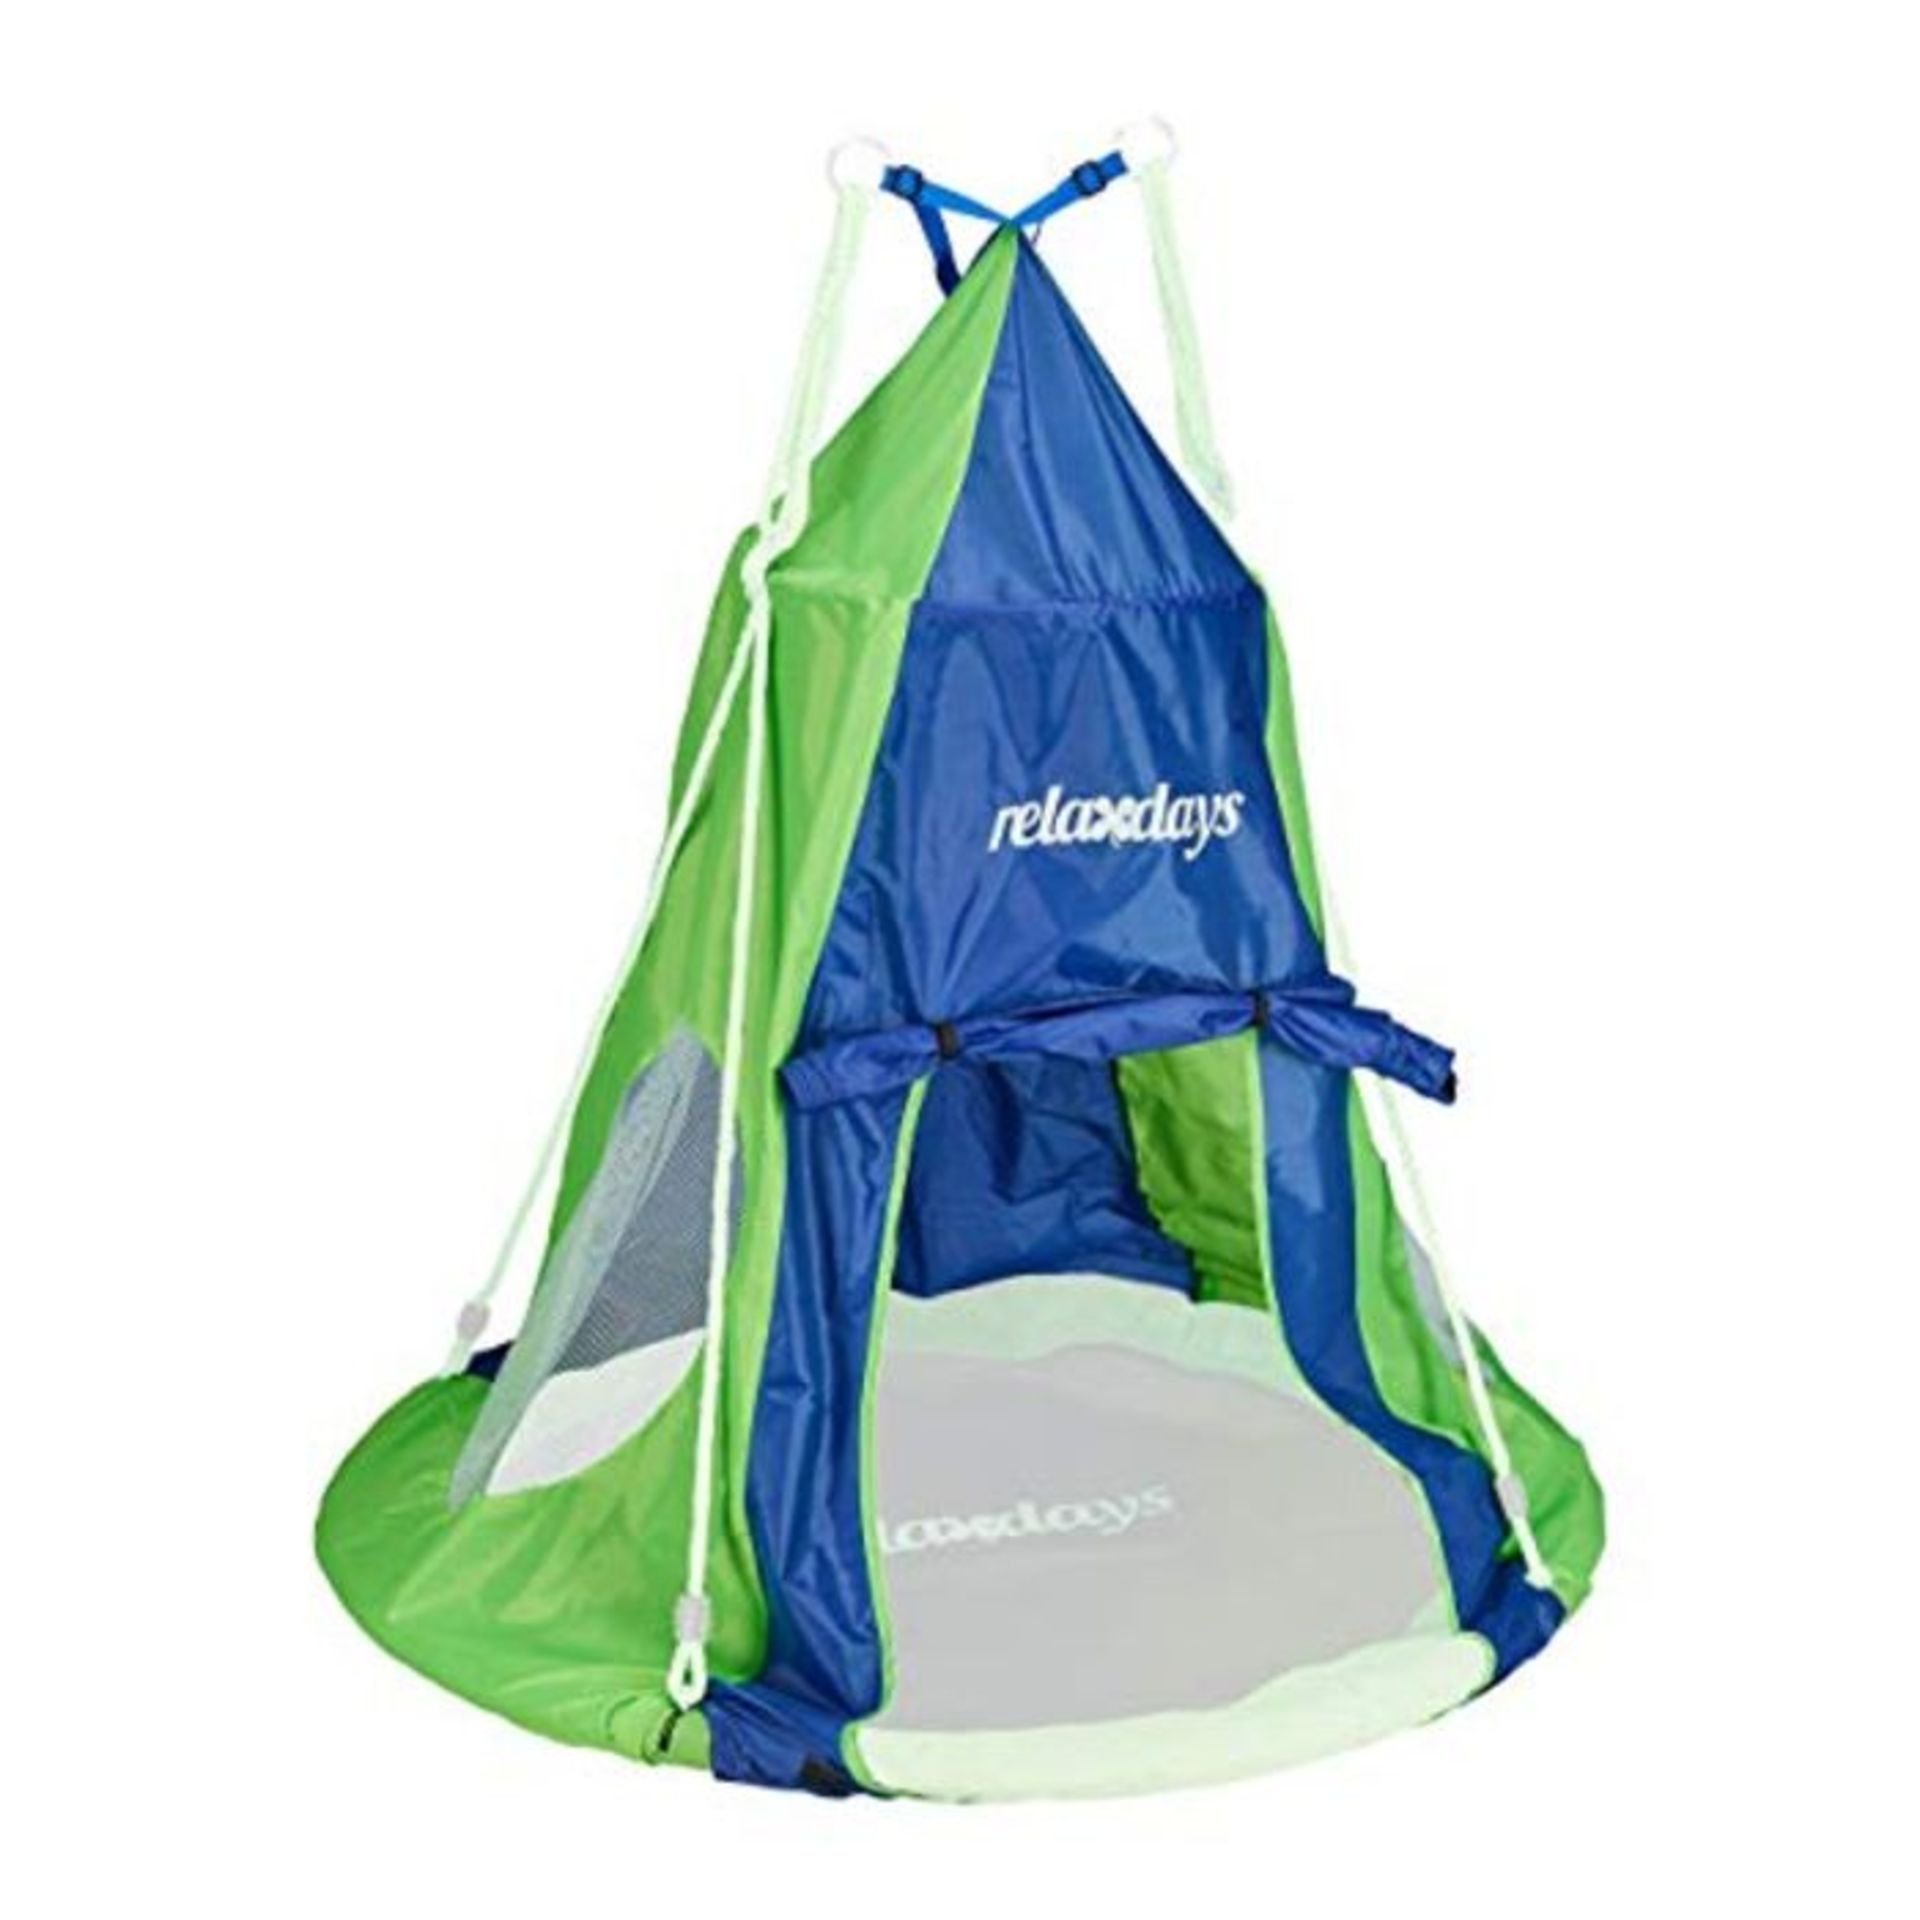 Relaxdays Tent for Swing Nest, Cover for Swinging Seat Disc, Hanging Swivel Chair Acce